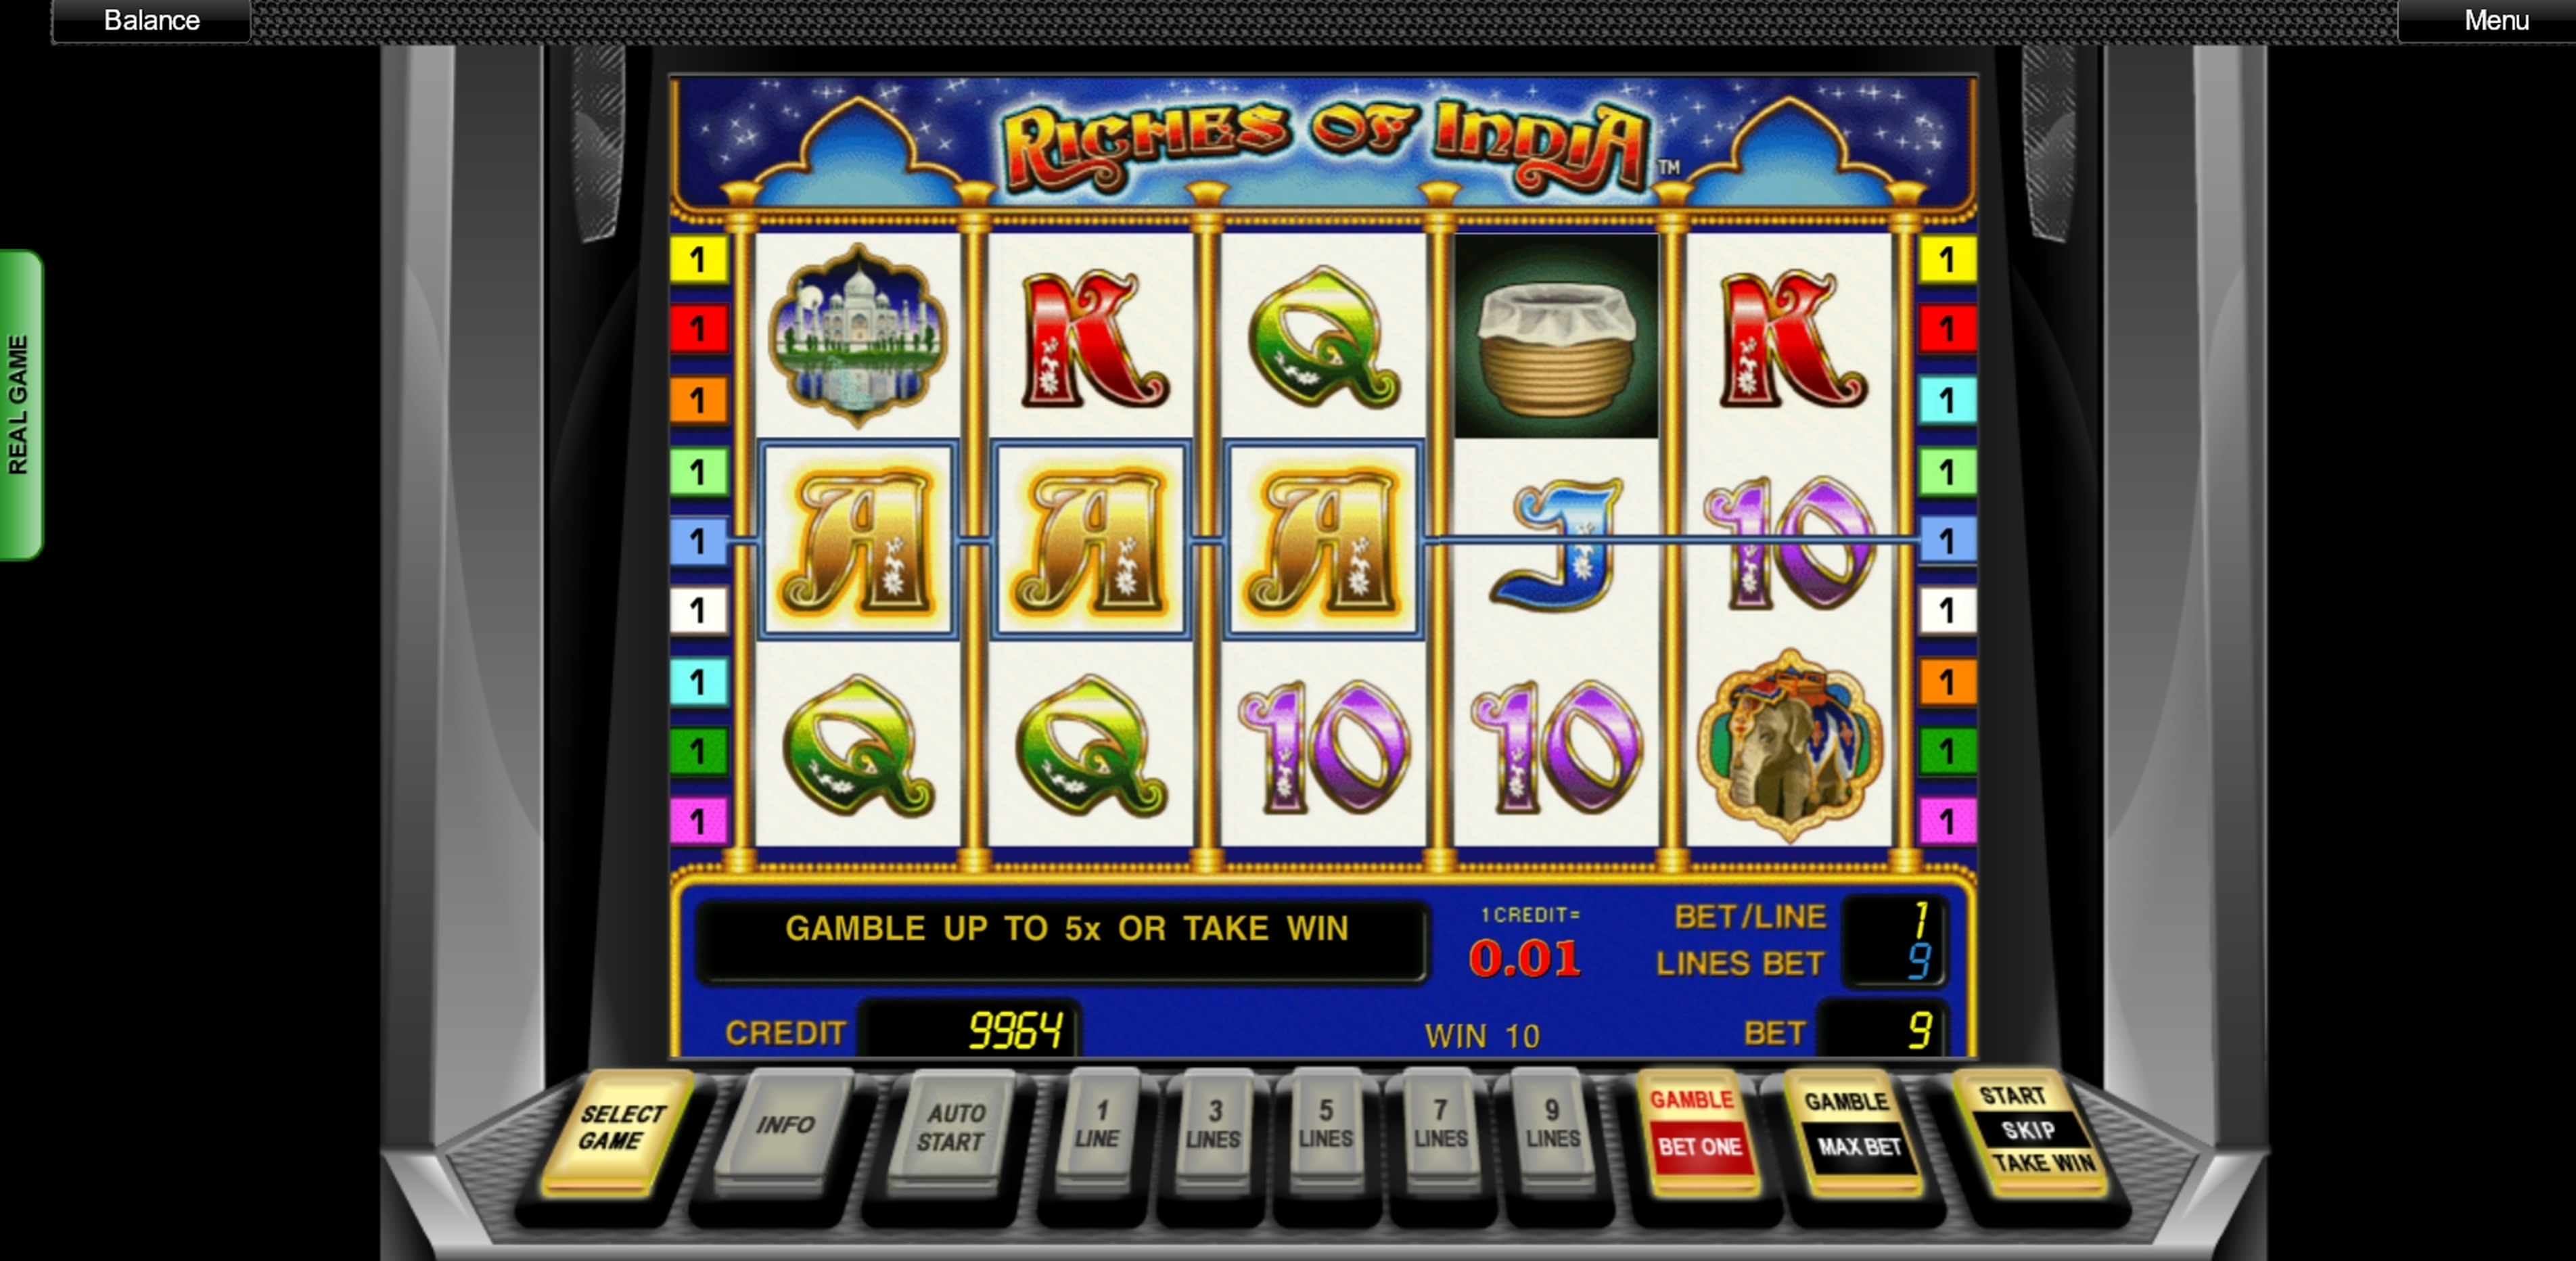 Win Money in Riches of India Free Slot Game by Novomatic